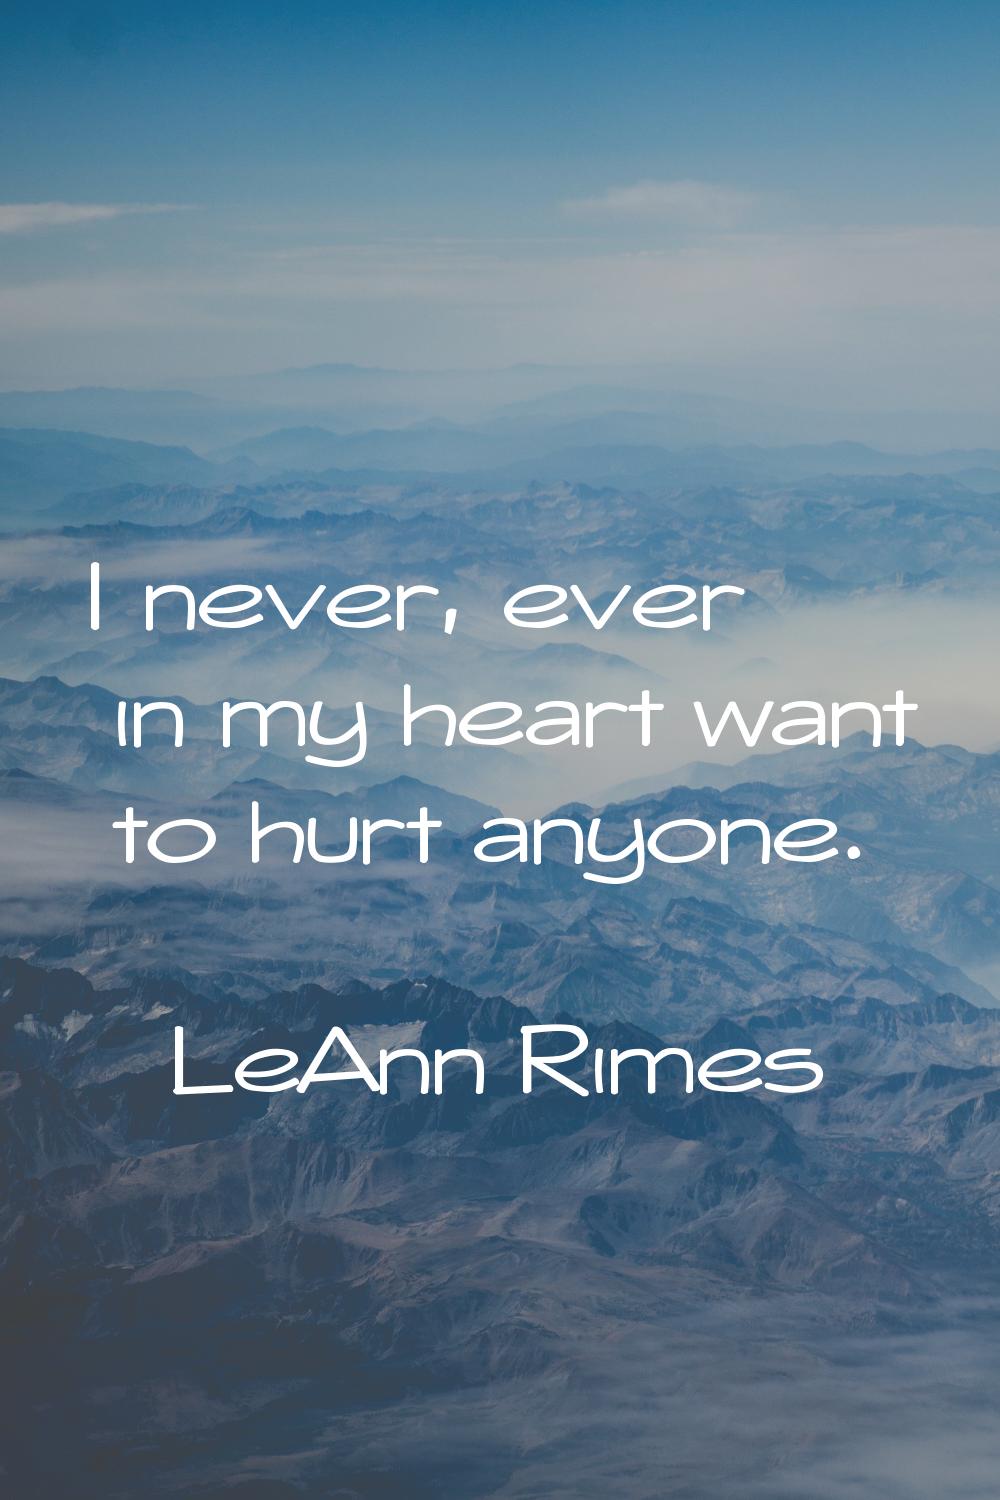 I never, ever in my heart want to hurt anyone.